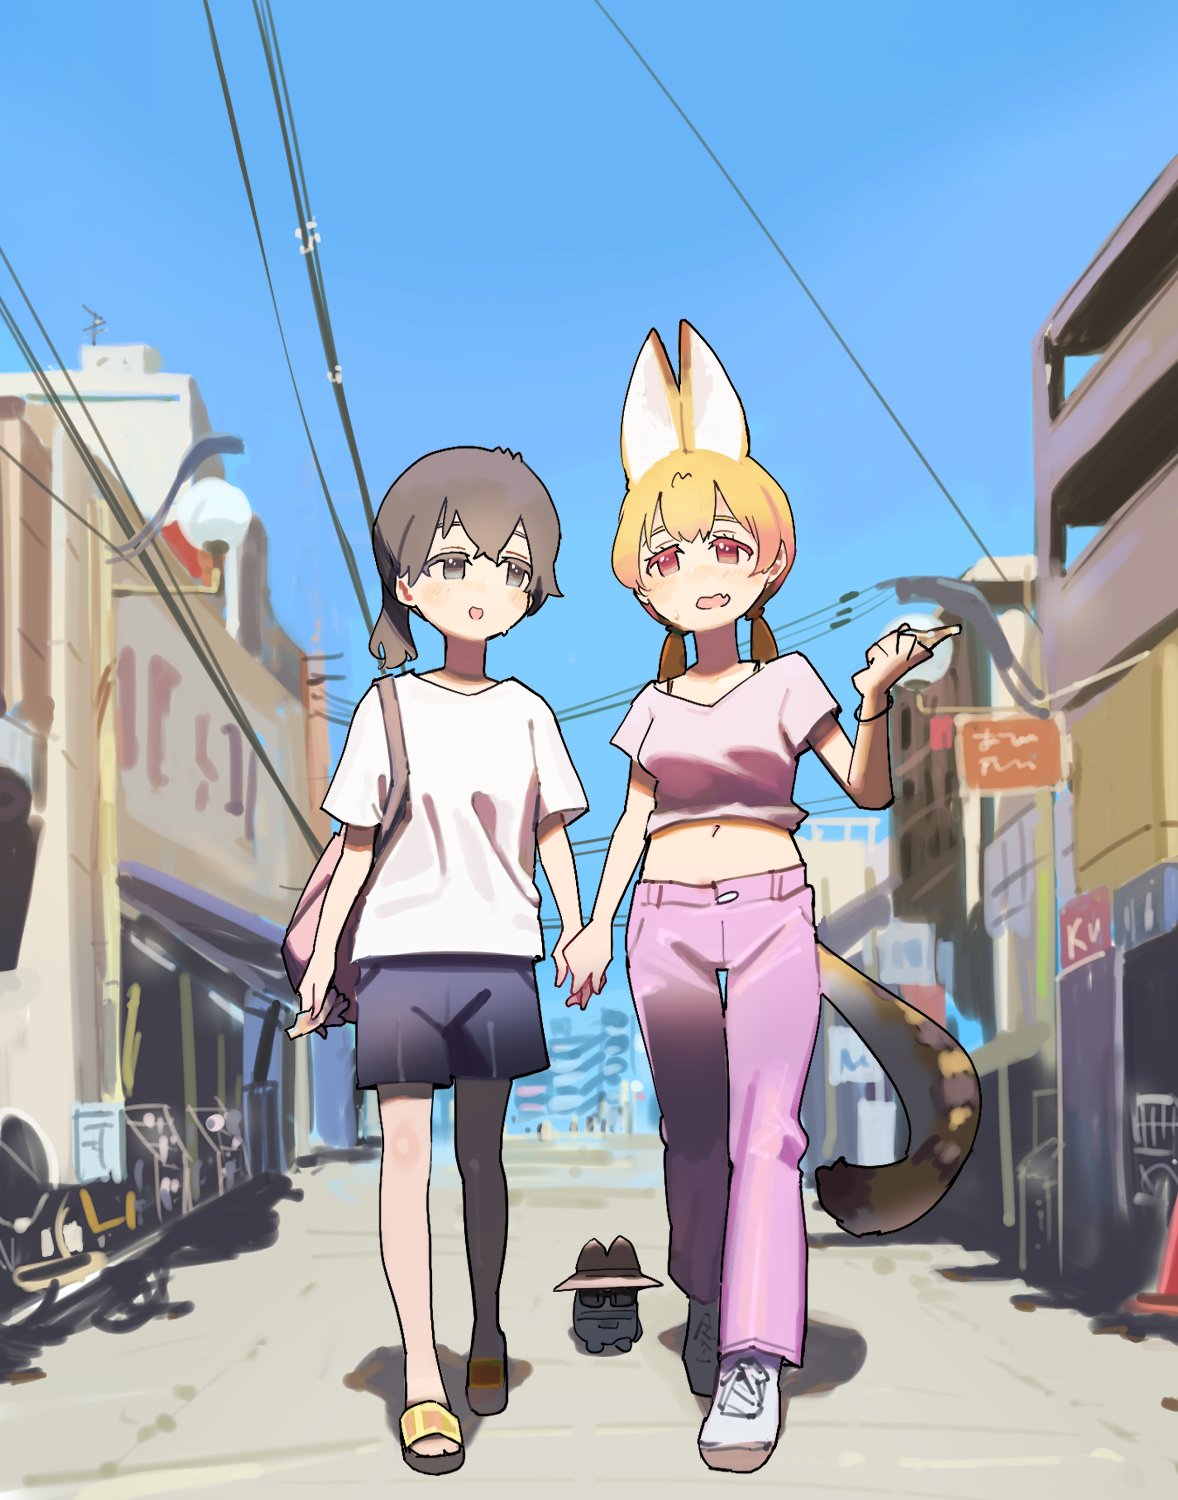 2girls alternate_costume alternate_hairstyle animal_ears backpack bag black_hair black_shorts blonde_hair cat_ears cat_girl cat_tail commentary_request crop_top highres kaban_(kemono_friends) kemono_friends lucky_beast_(kemono_friends) midriff multiple_girls navel pants pink_pants pink_shirt sandals serval_(kemono_friends) shirt shoes short_hair short_sleeves shorts sneakers t-shirt tail twintails wamawmwm white_footwear white_shirt